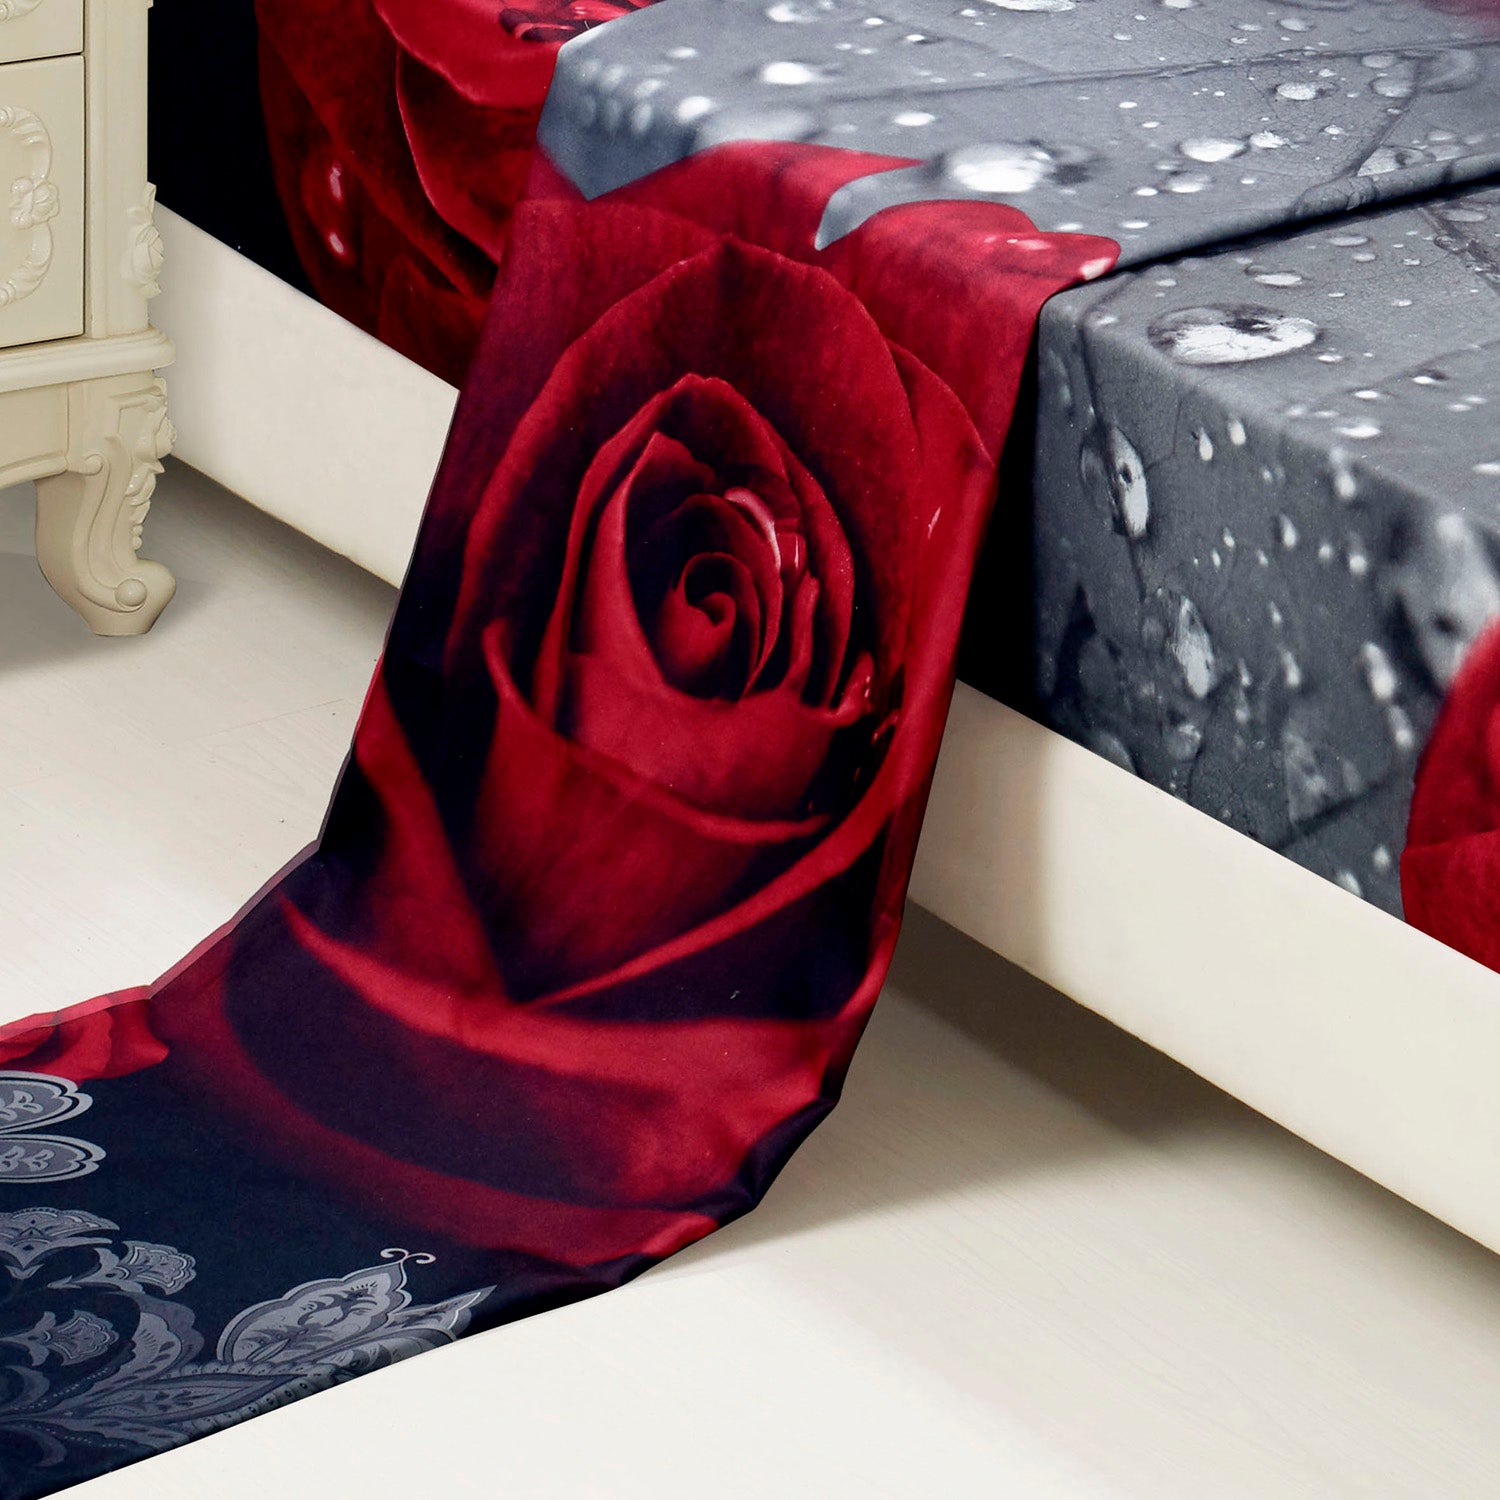 PASSIONATE RED ROSE 4PC PRINTED BEDDING SHEET SET - BREATHABLE AND COOLING SHEETS - HOTEL LUXURY - EXTRA SOFT - WRINKLE, FADE, STAIN RESISTANCE